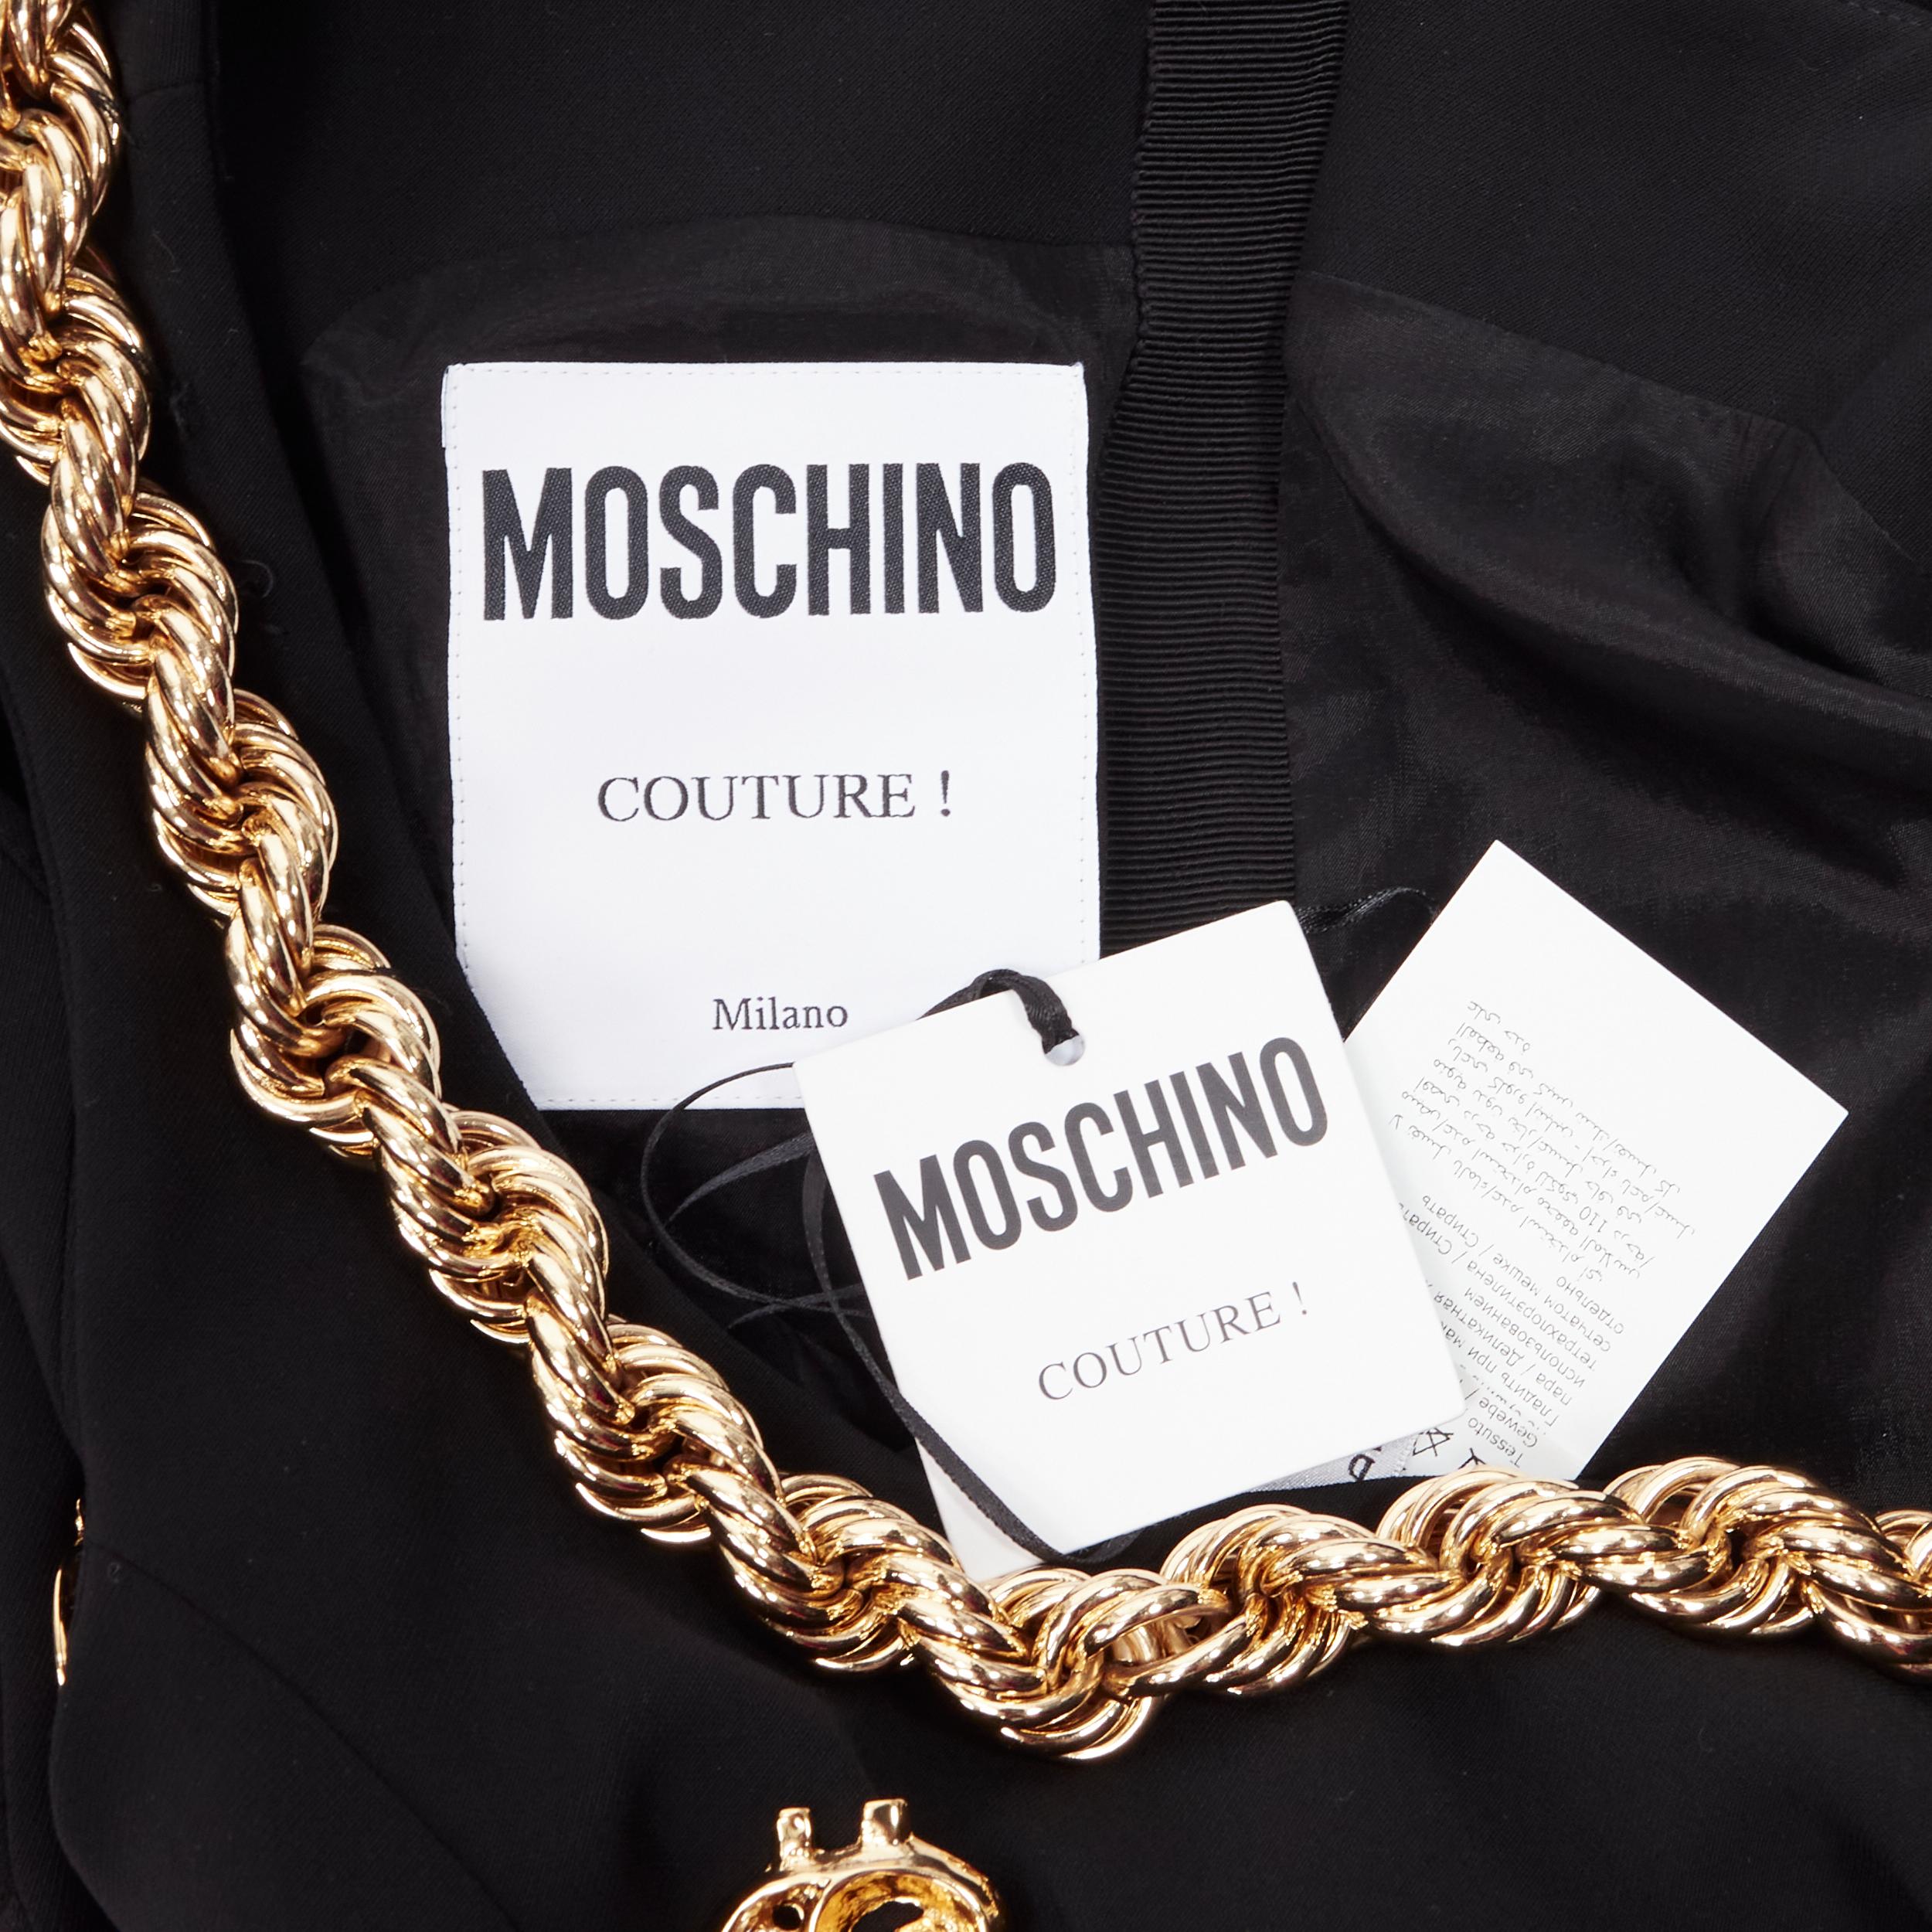 new MOSCHINO Couture! 2019 Runway gold dollar dress Kylie Jenner IT42 M 2